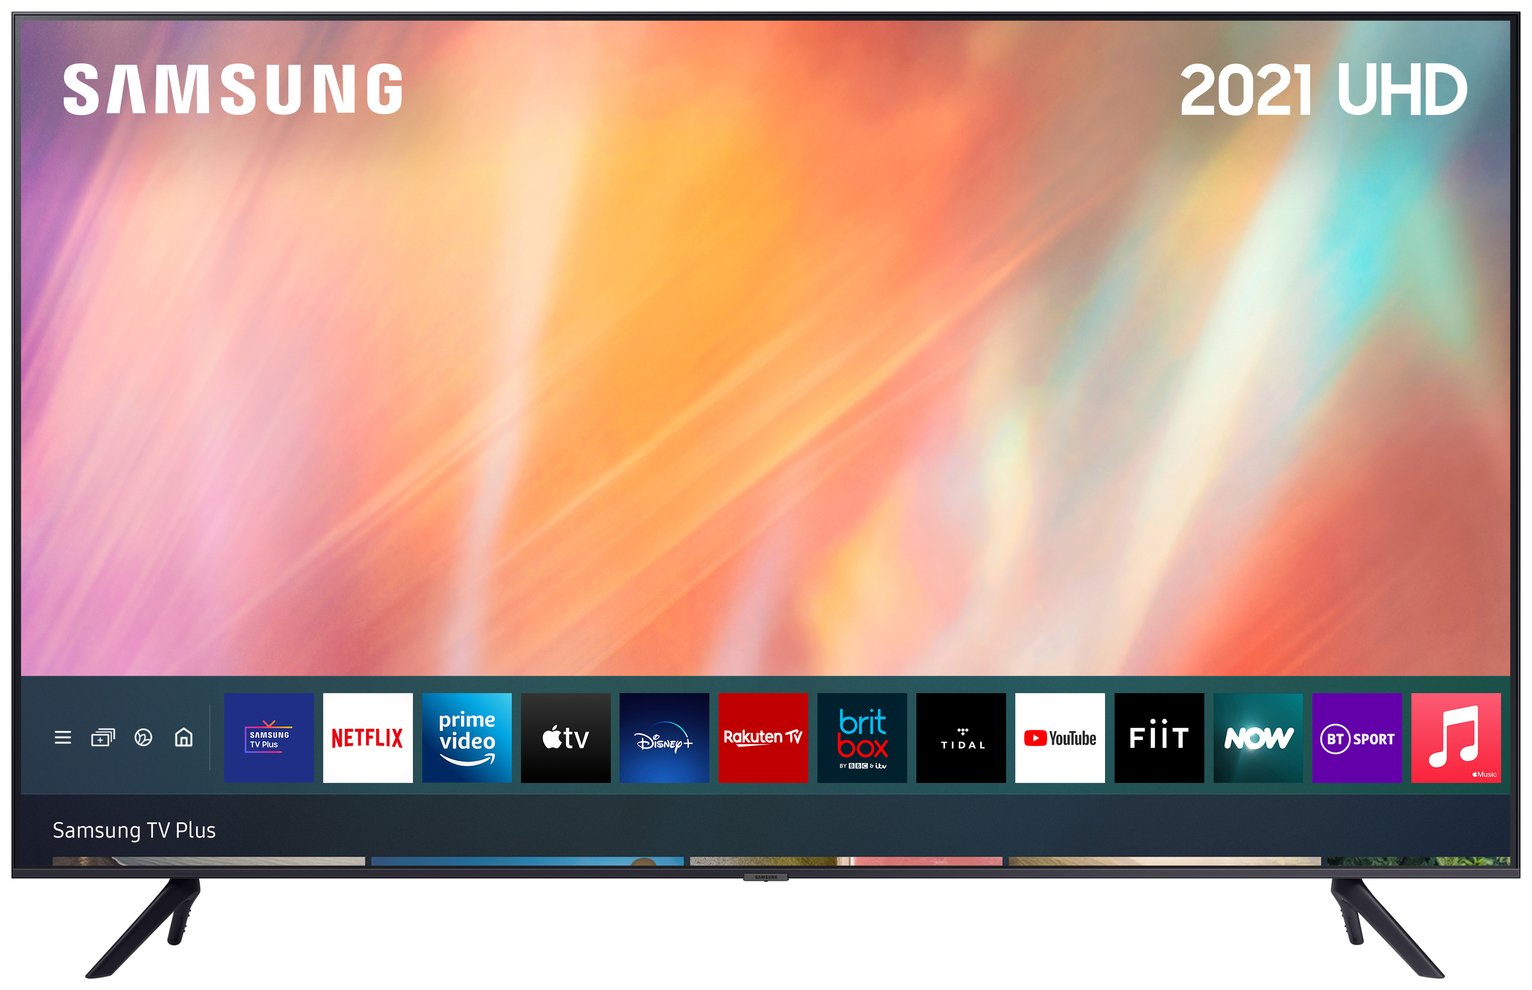 TV Feature Check: Determining If Your Samsung TV Has Bluetooth